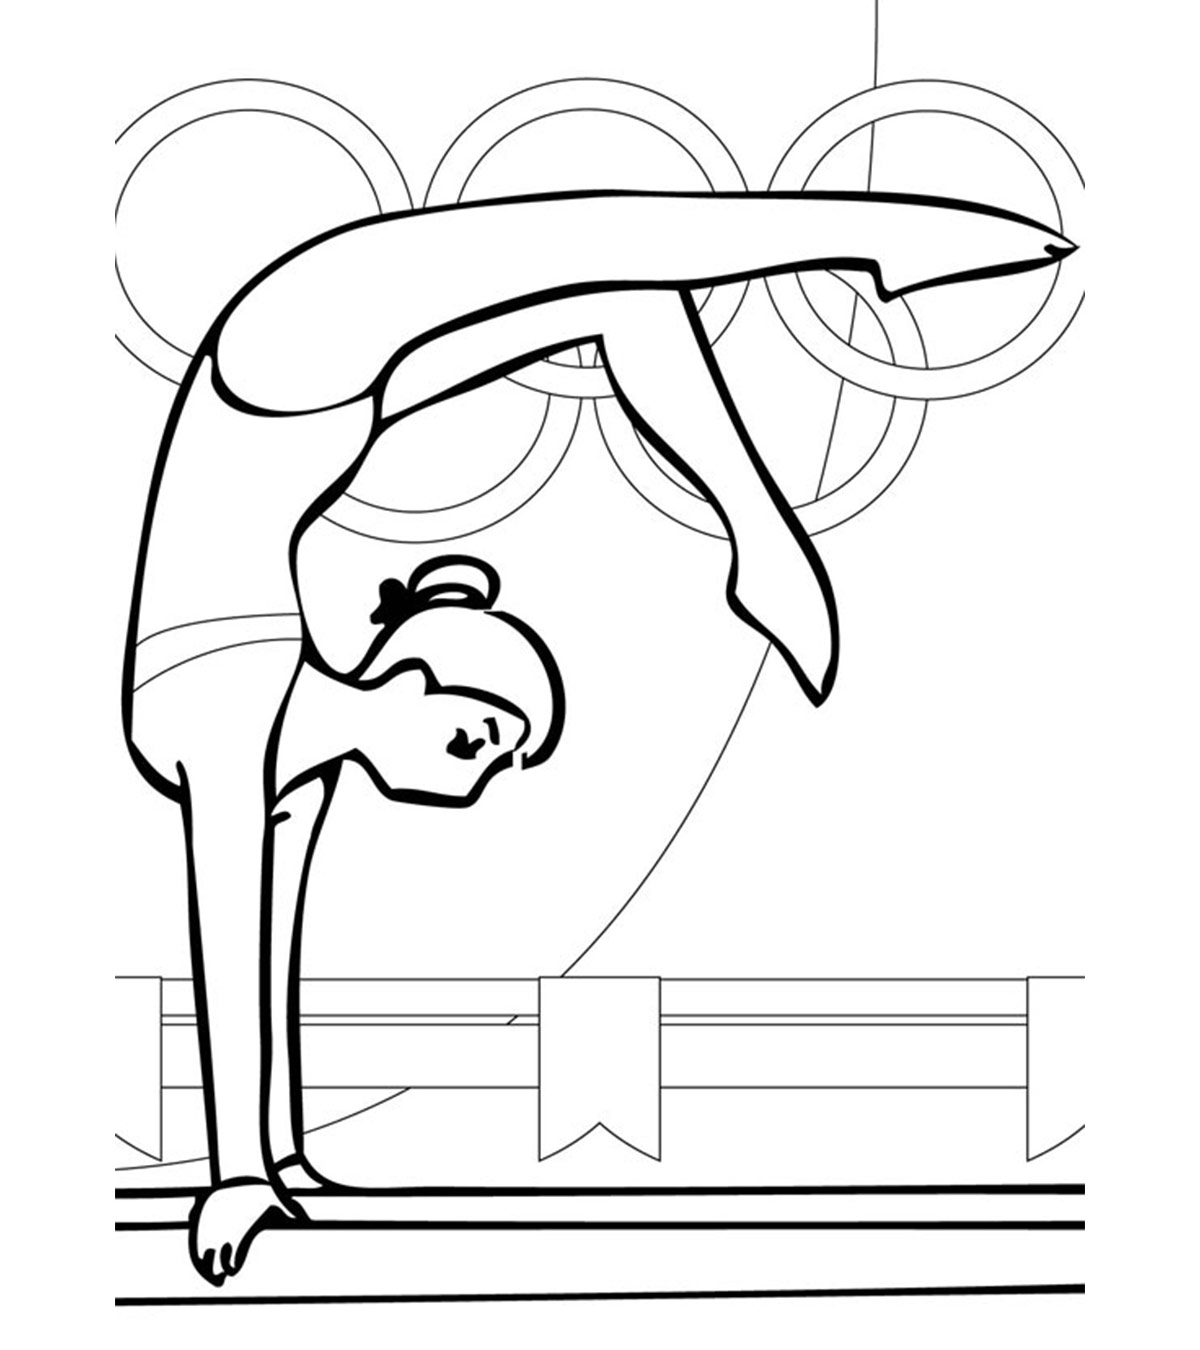 Free Printable Sports Coloring Pages Onlinemomjunction.com